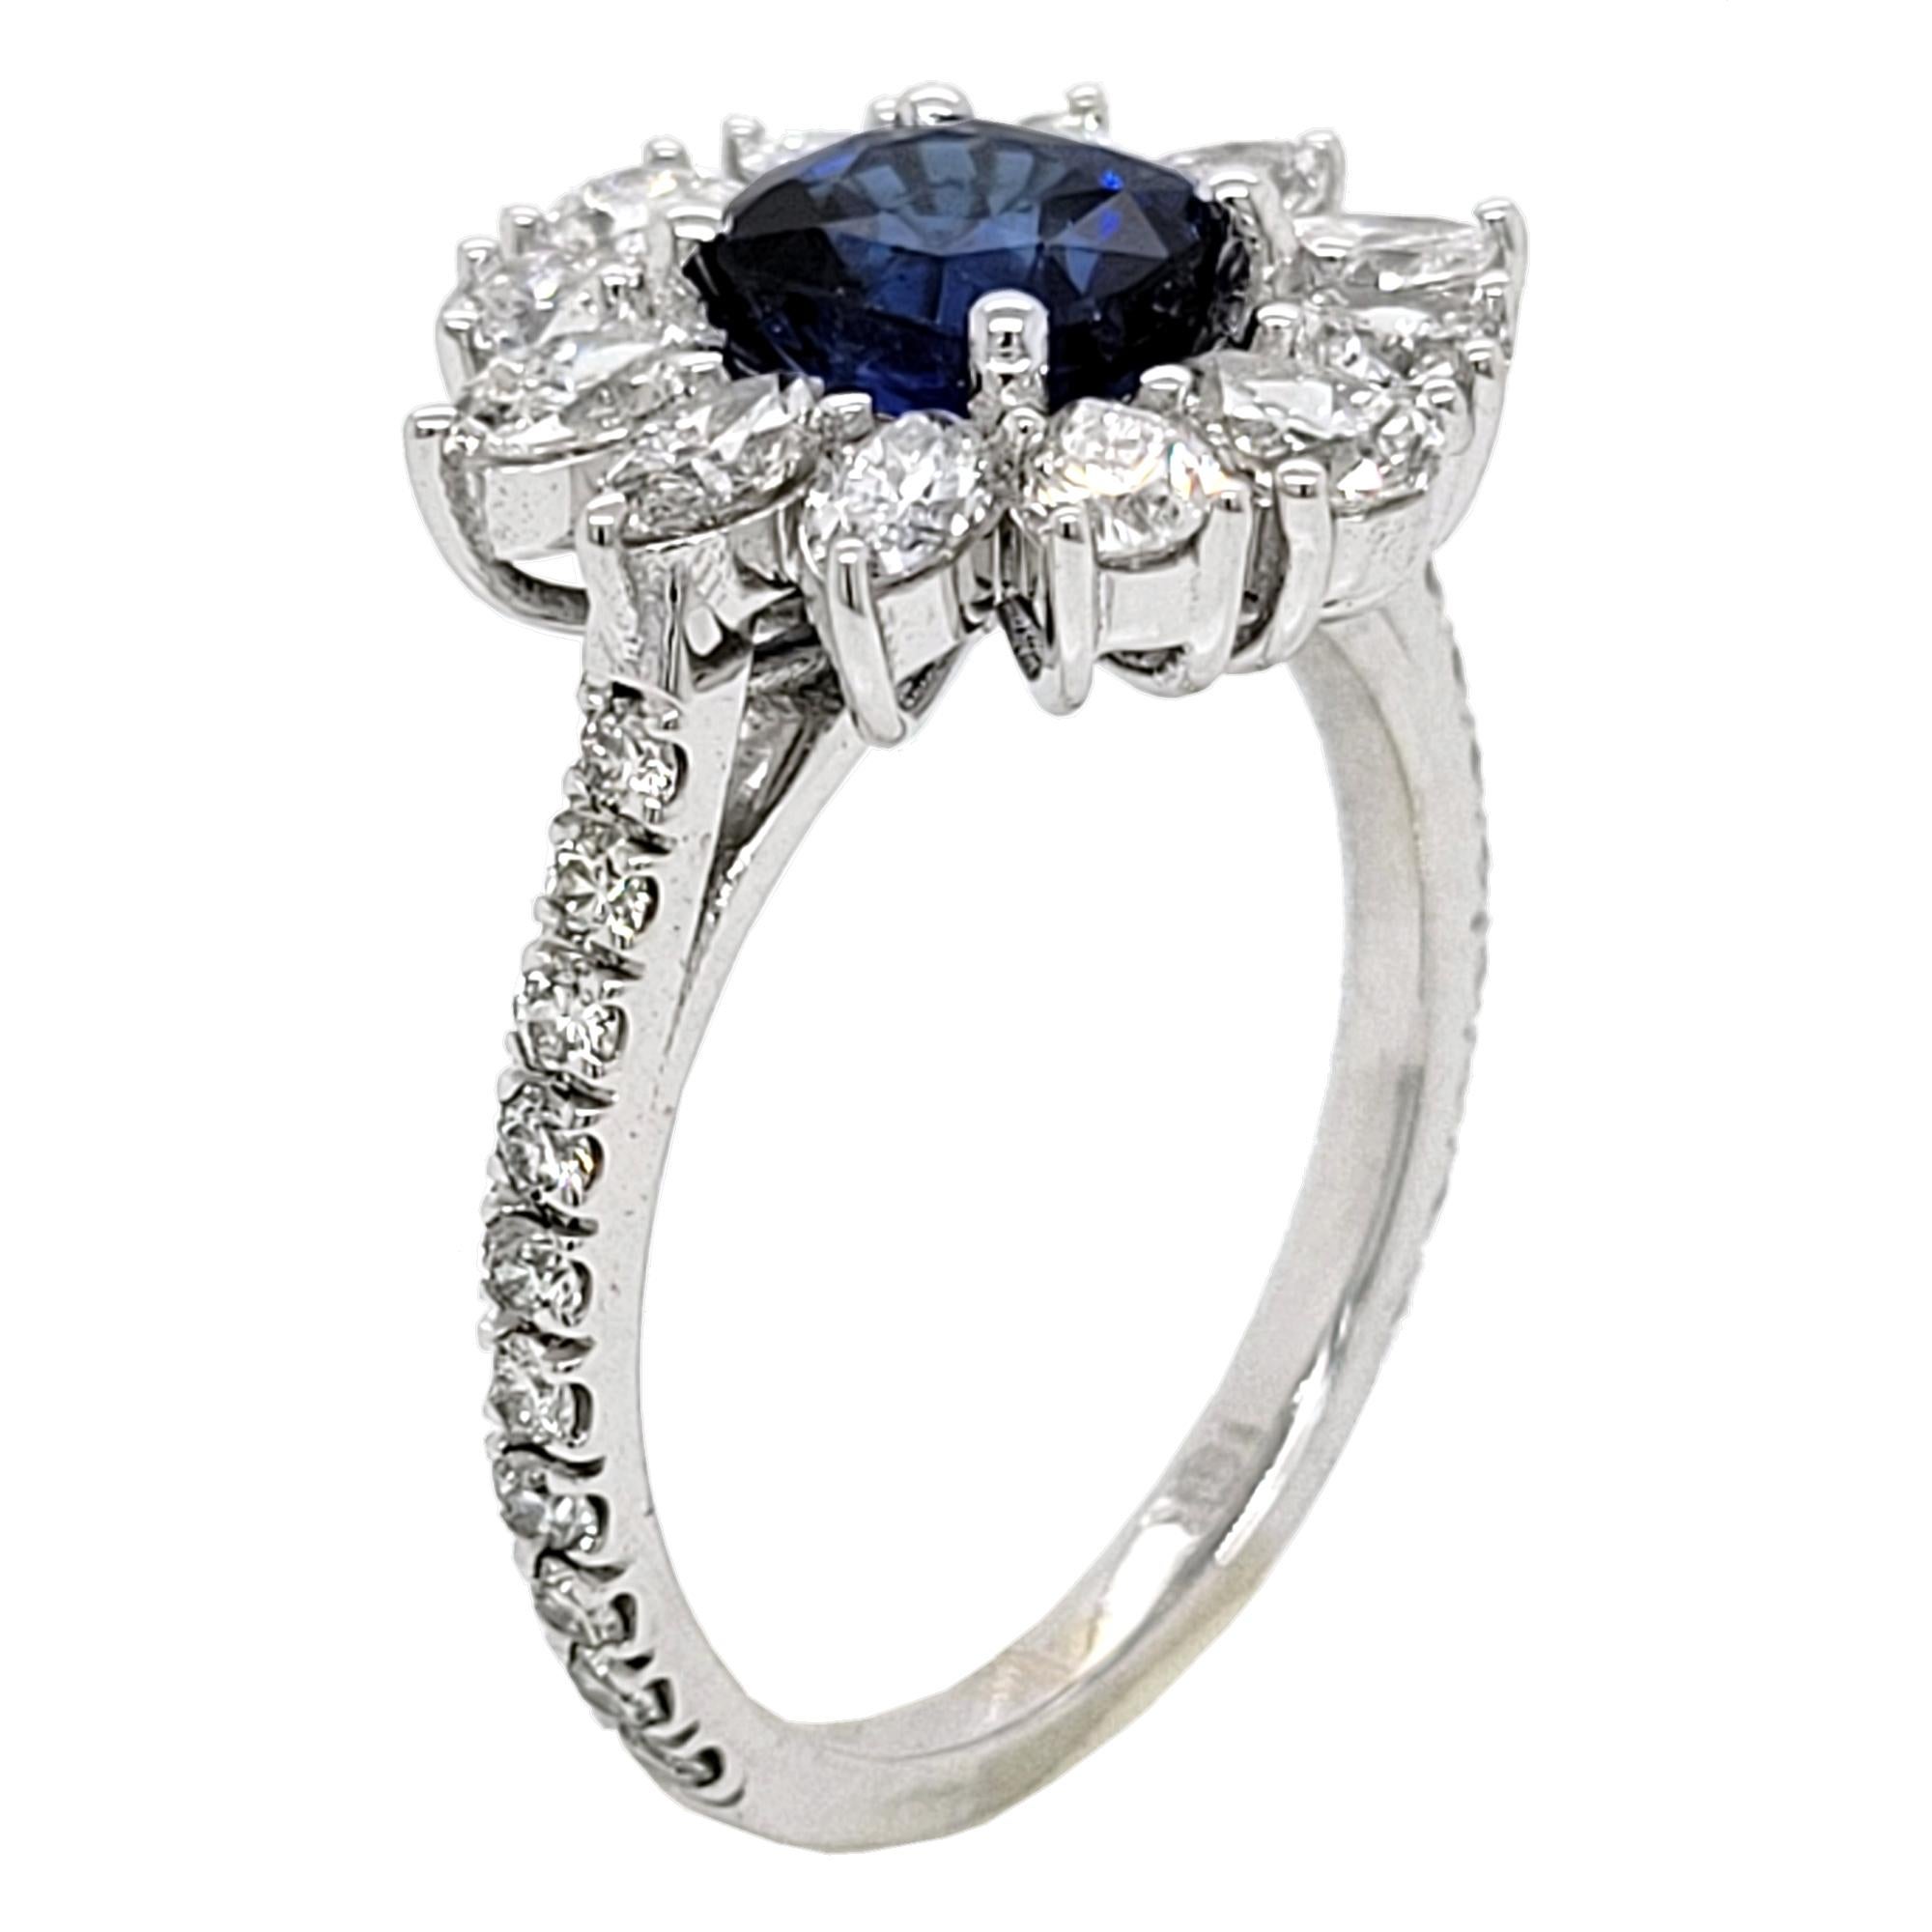 A  Beautiful Color 1.64 Ct Cushion Shaped Sapphire set in a gorgeous 18k gold  Pave set engagement Ring with halo of Pear and Marquise Shape Diamonds. Total diamond weight of 1.58 Ct. on the side. 

Center stone: 1.64 Ct Cushion Shape Sapphire
Side